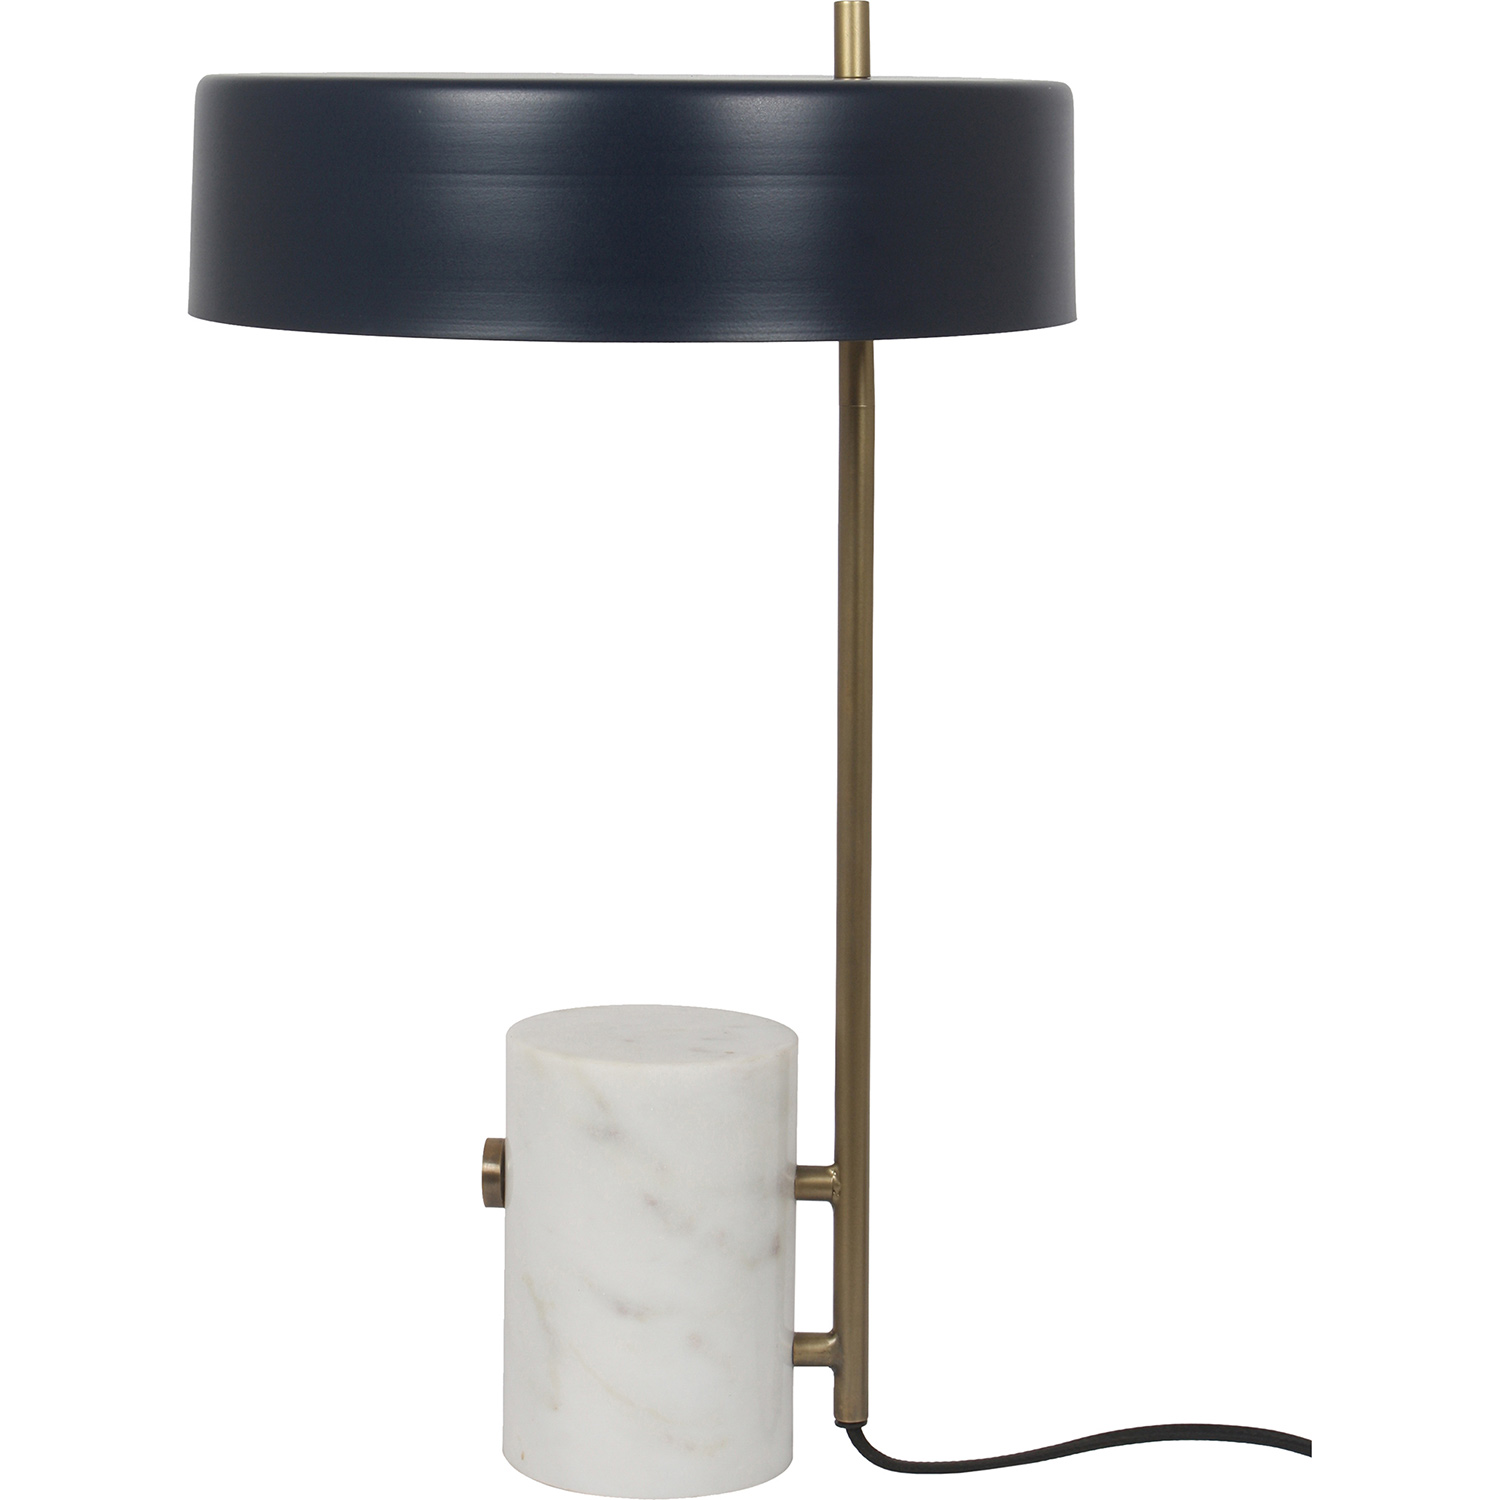 Ren-Wil Monty Table Lamp - Natural Marble